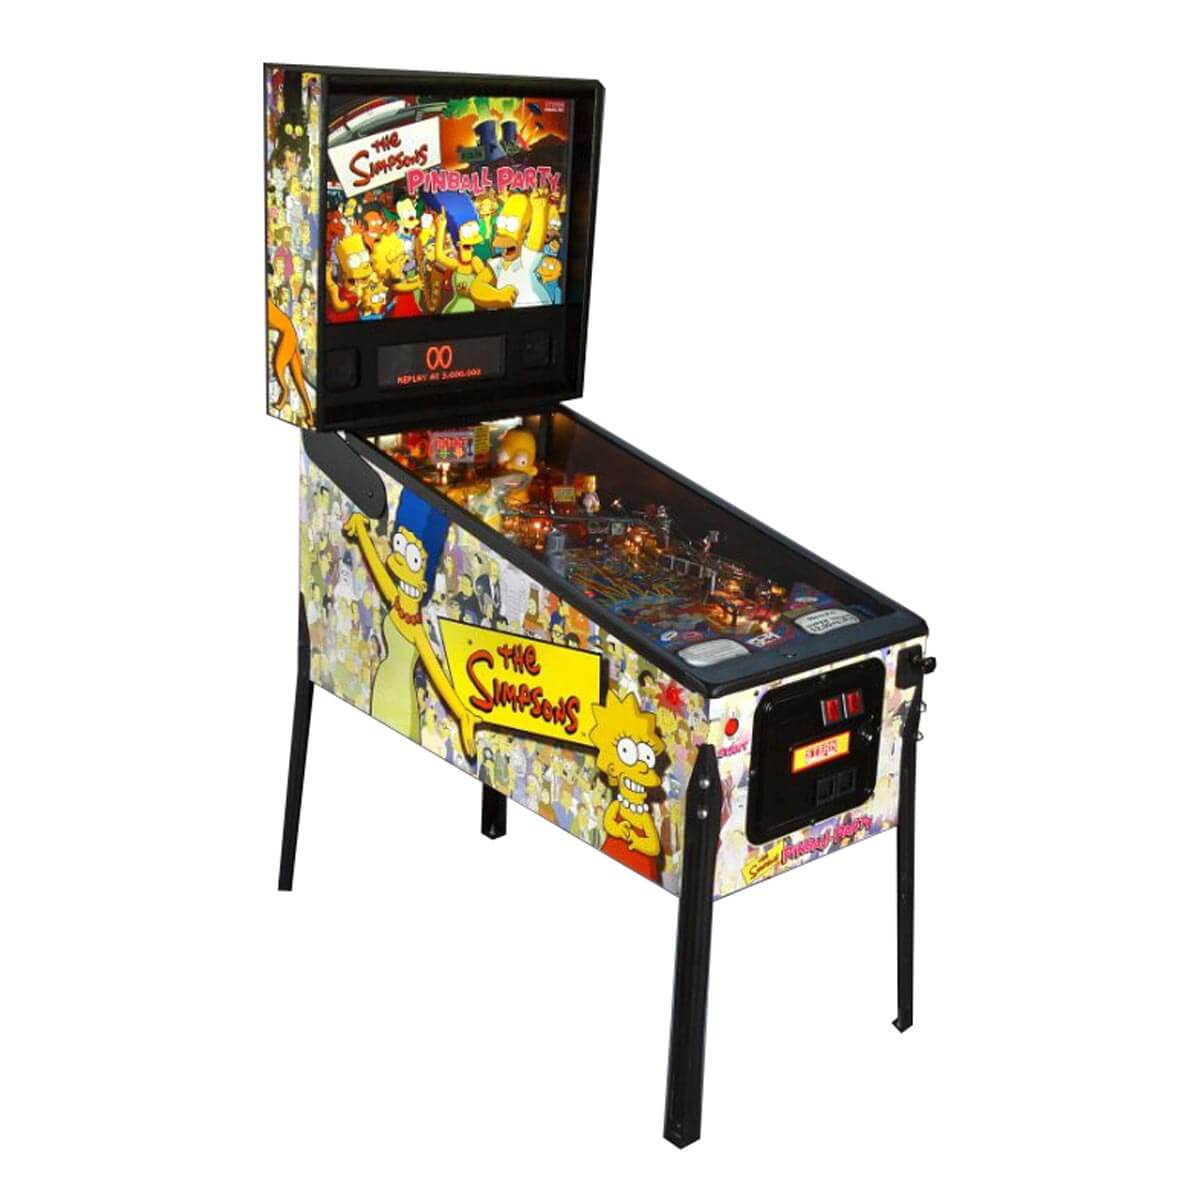 Stern The Simpsons Pinball Party Pinball Machine Couch Plastic 545-6063-00 New!